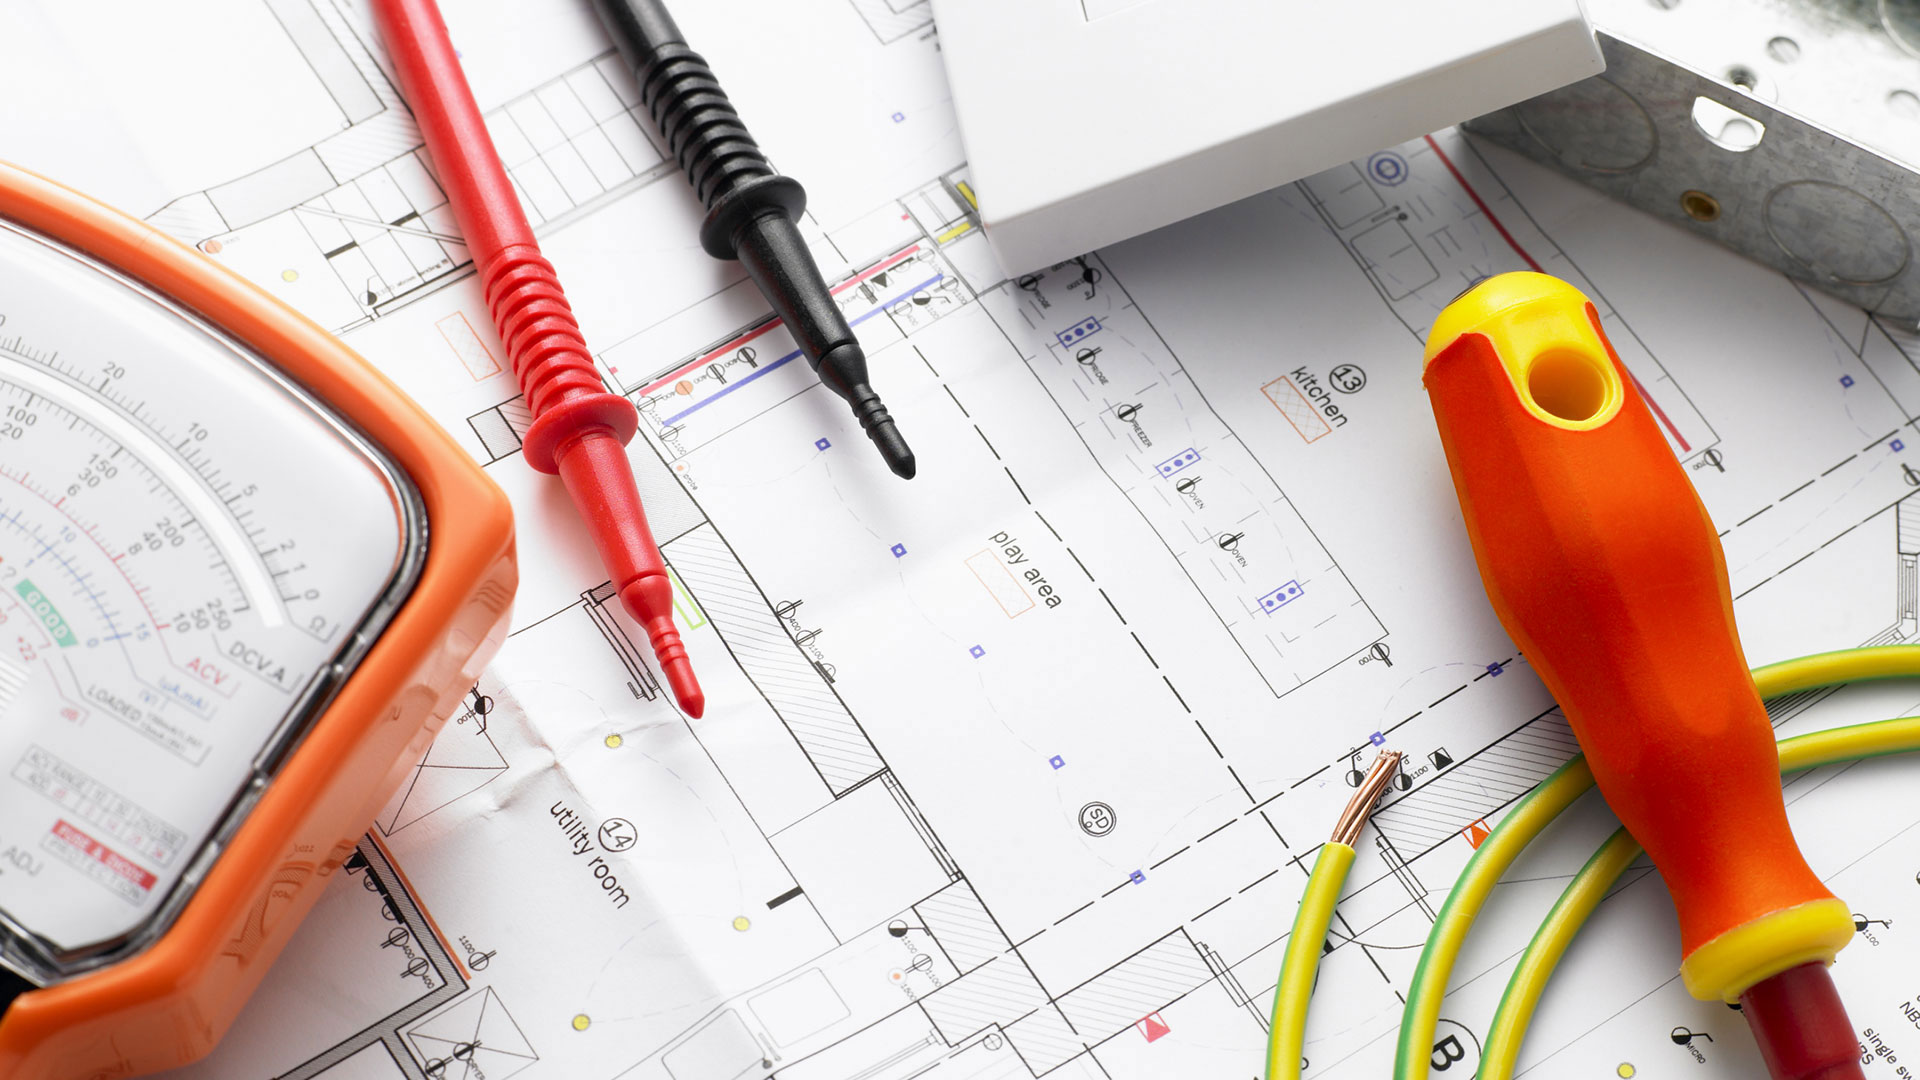 Know about the Electrical installations in Norman, OK